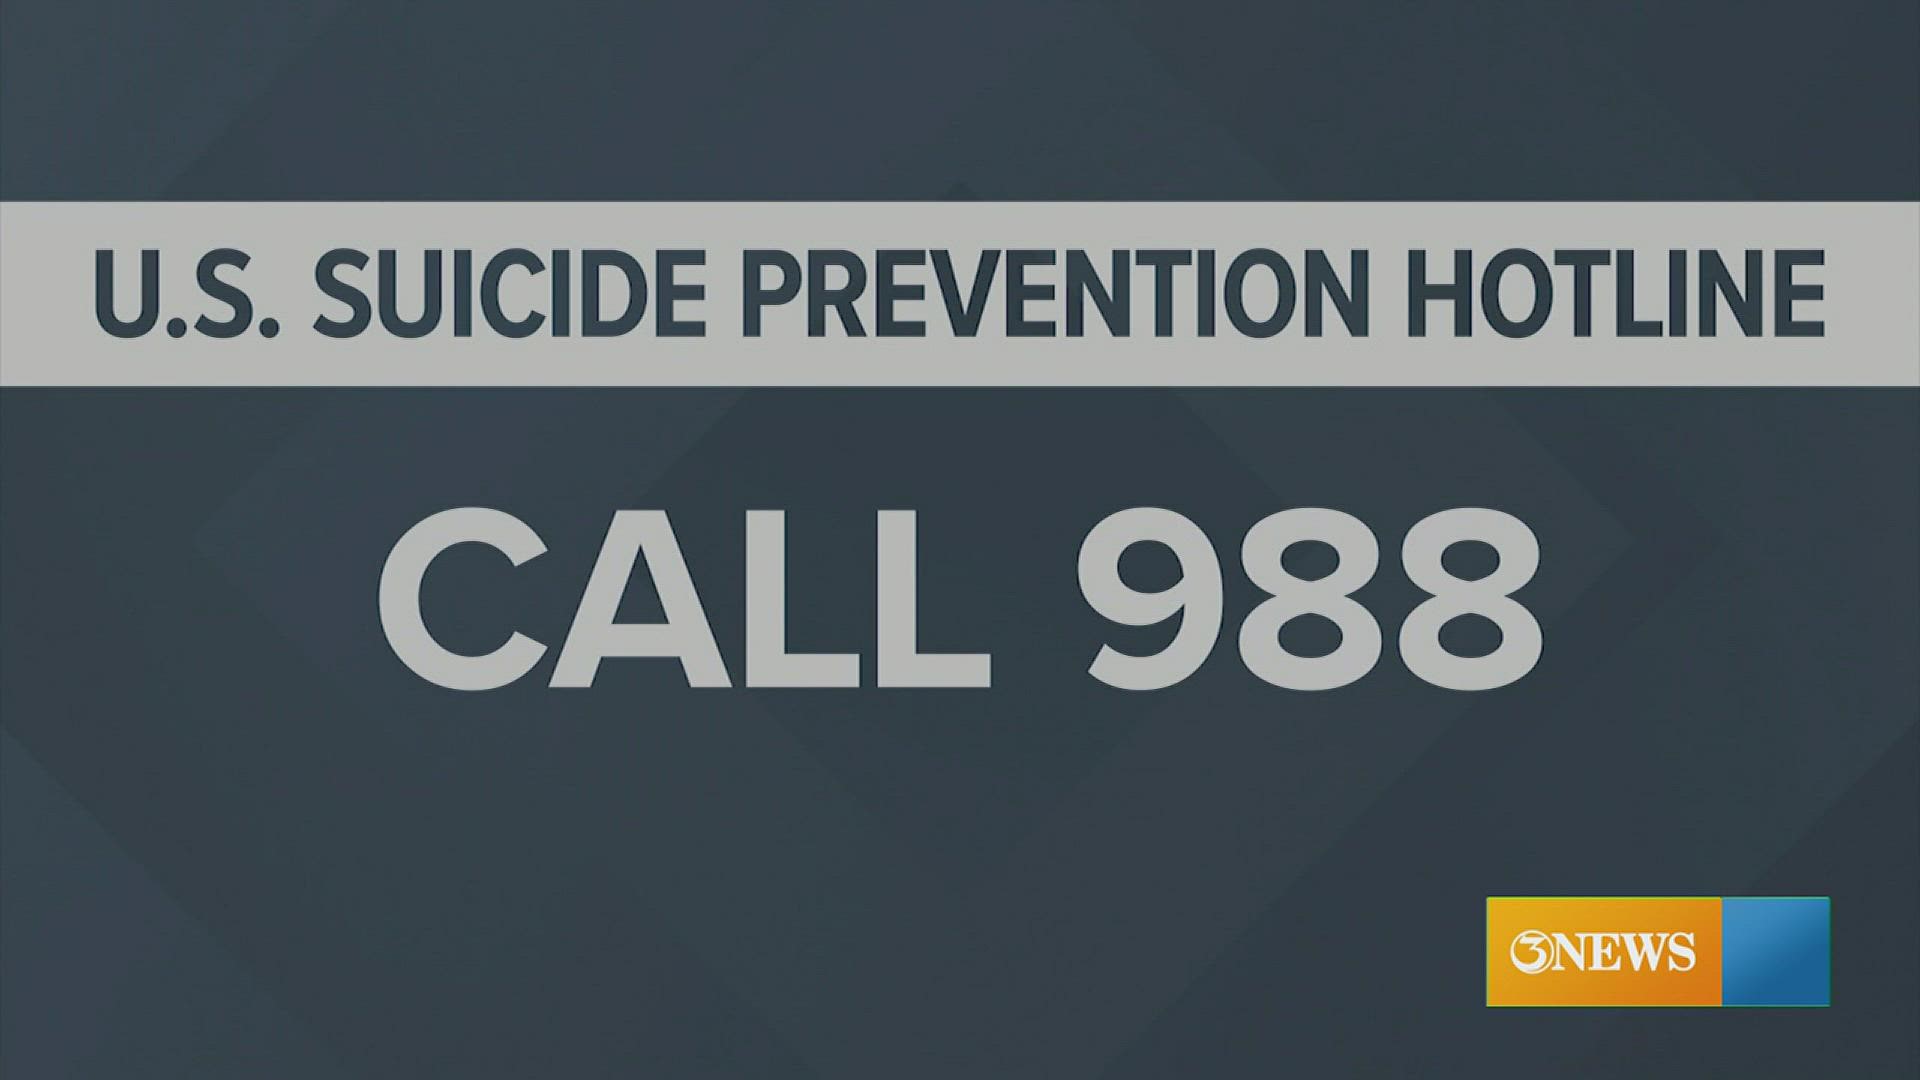 Data shows more than 45,000 Americans die by suicide each year. There is help available.